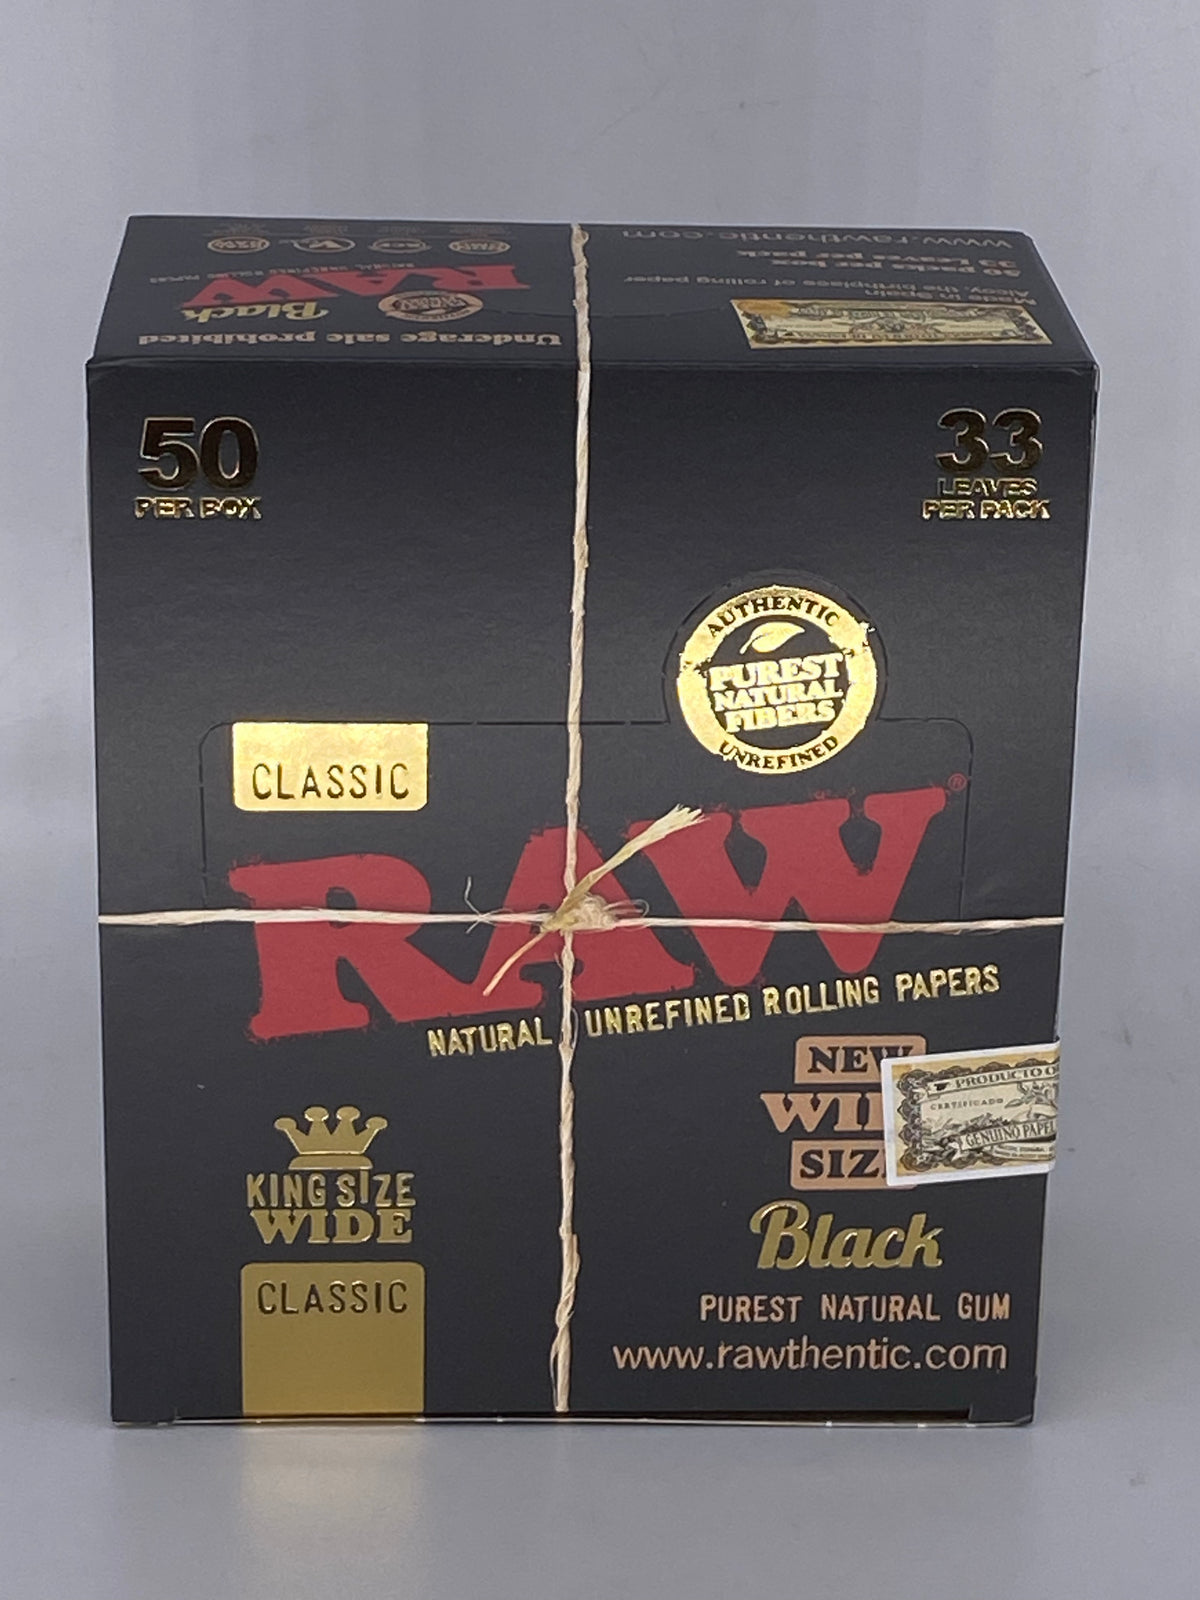 RAW Black Classic King Size Wide papers 50 Ct Box